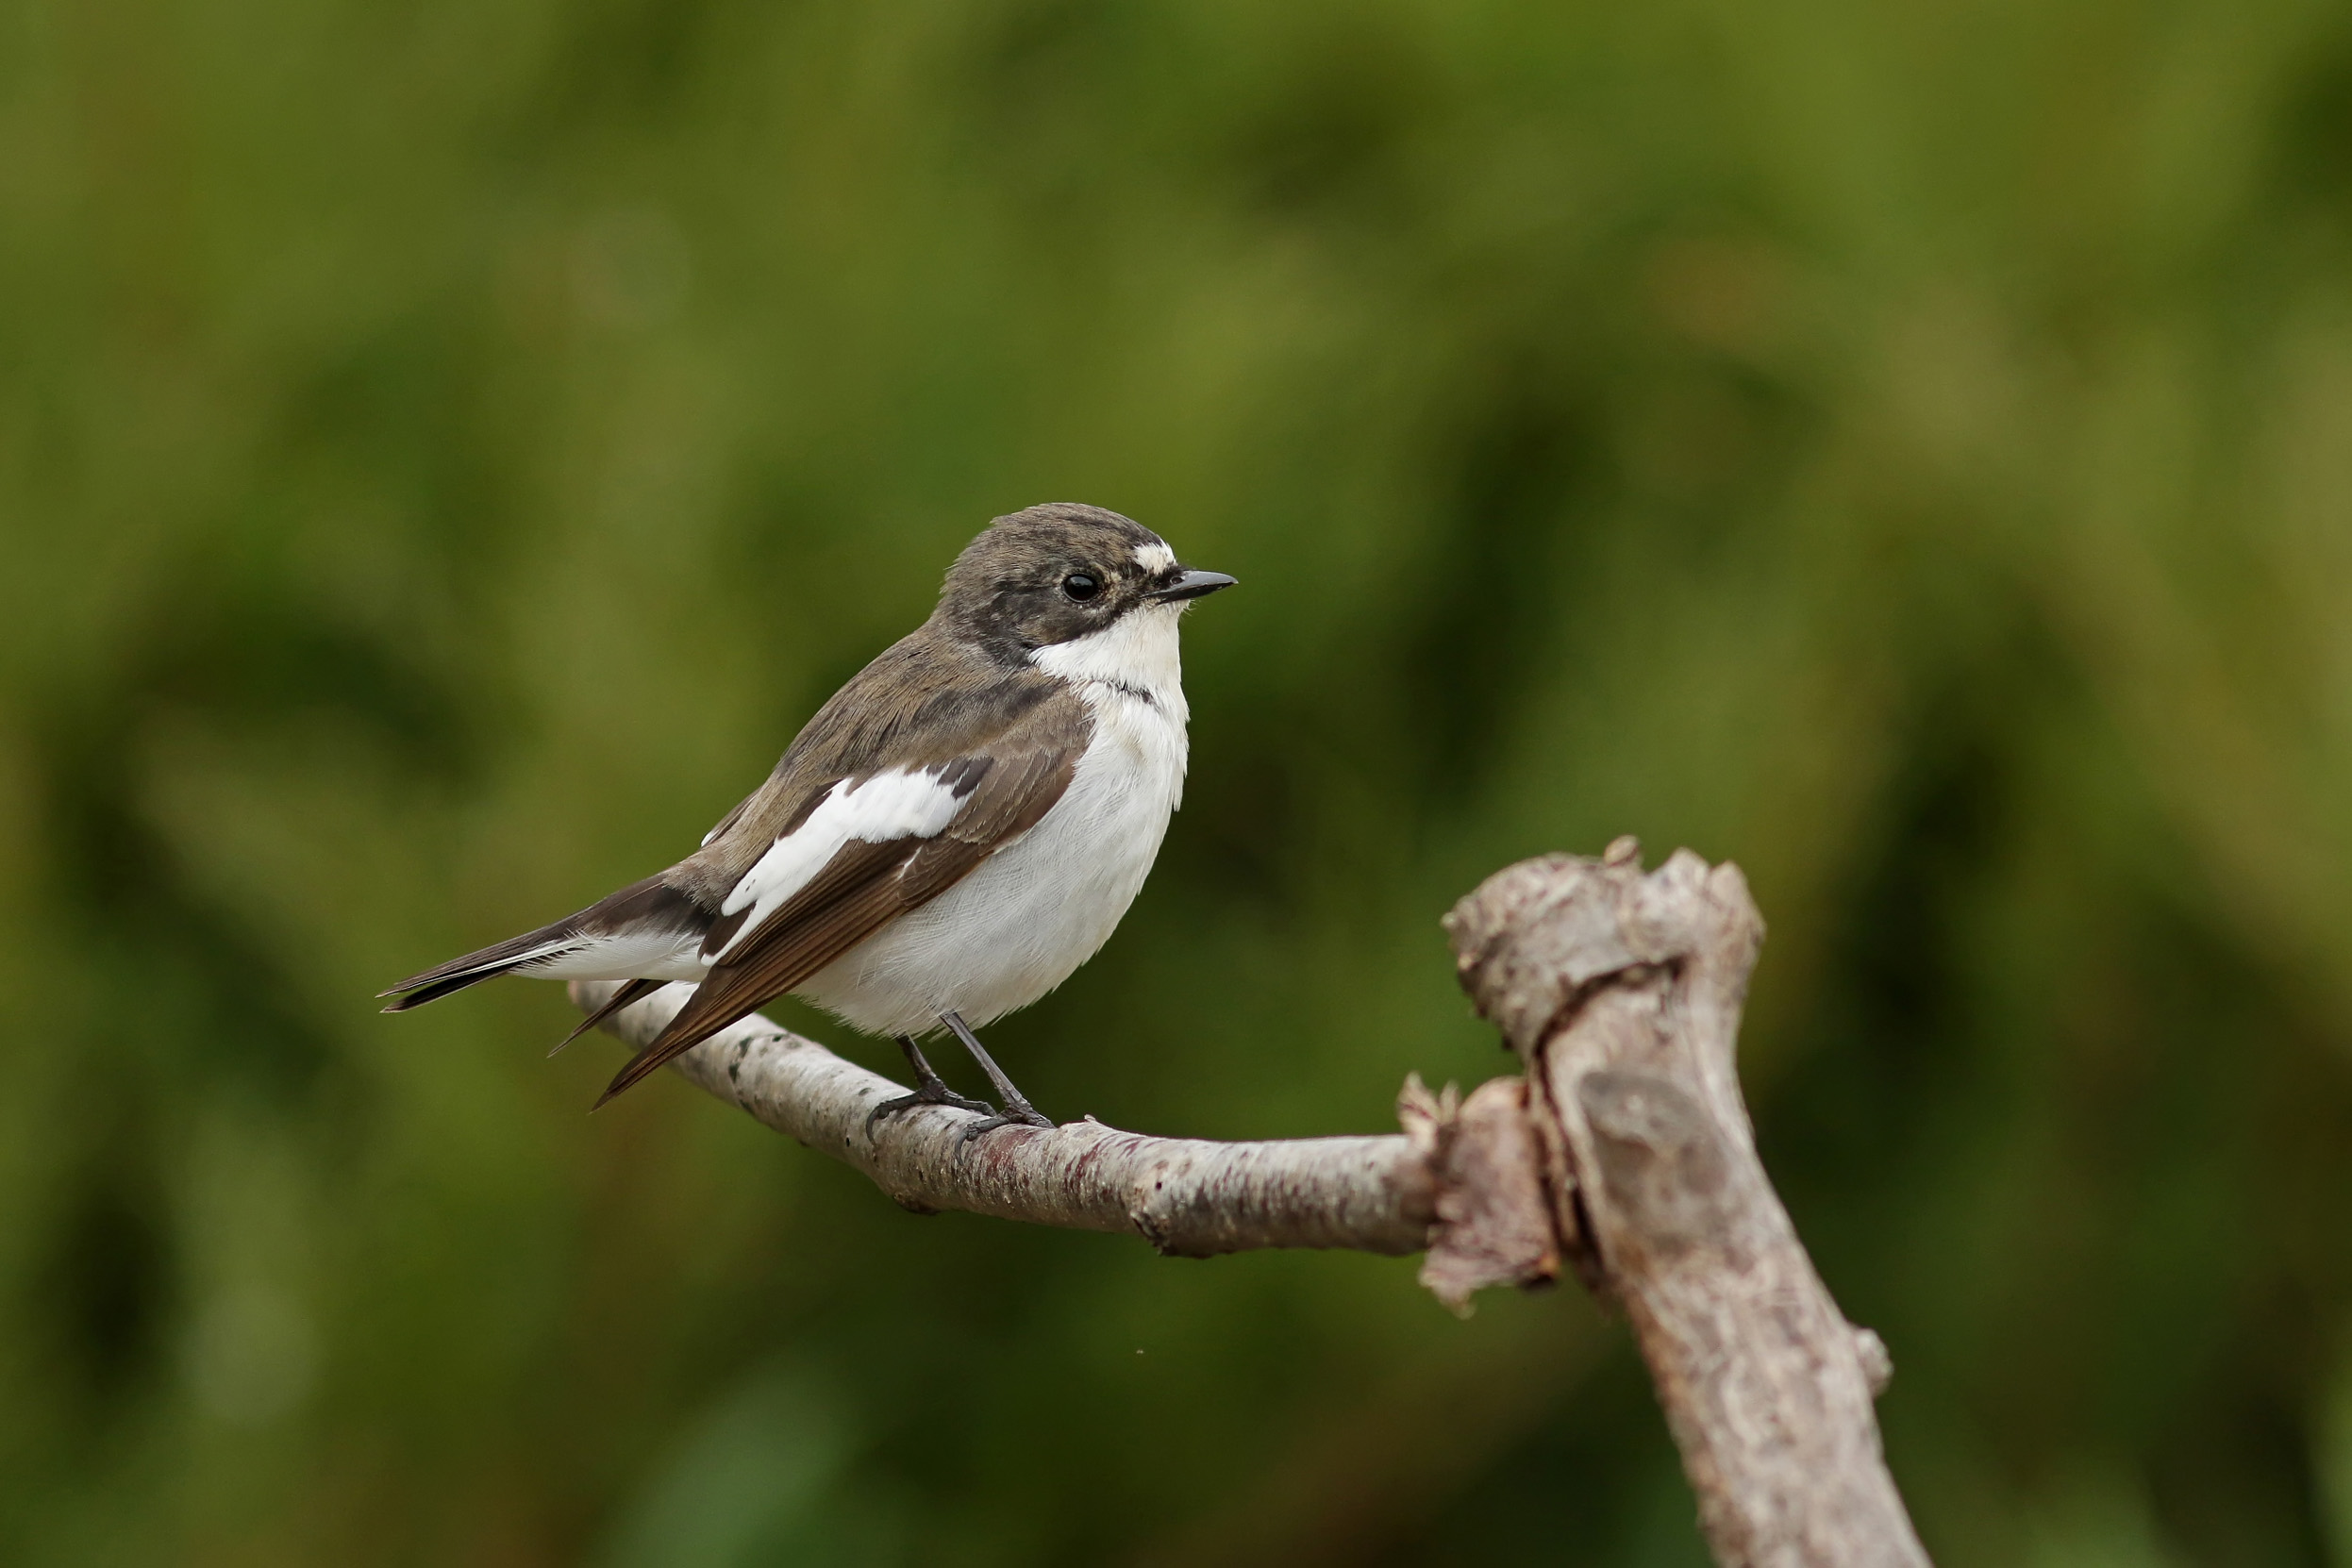 A lone female Pied Flycatcher perched on a branch.